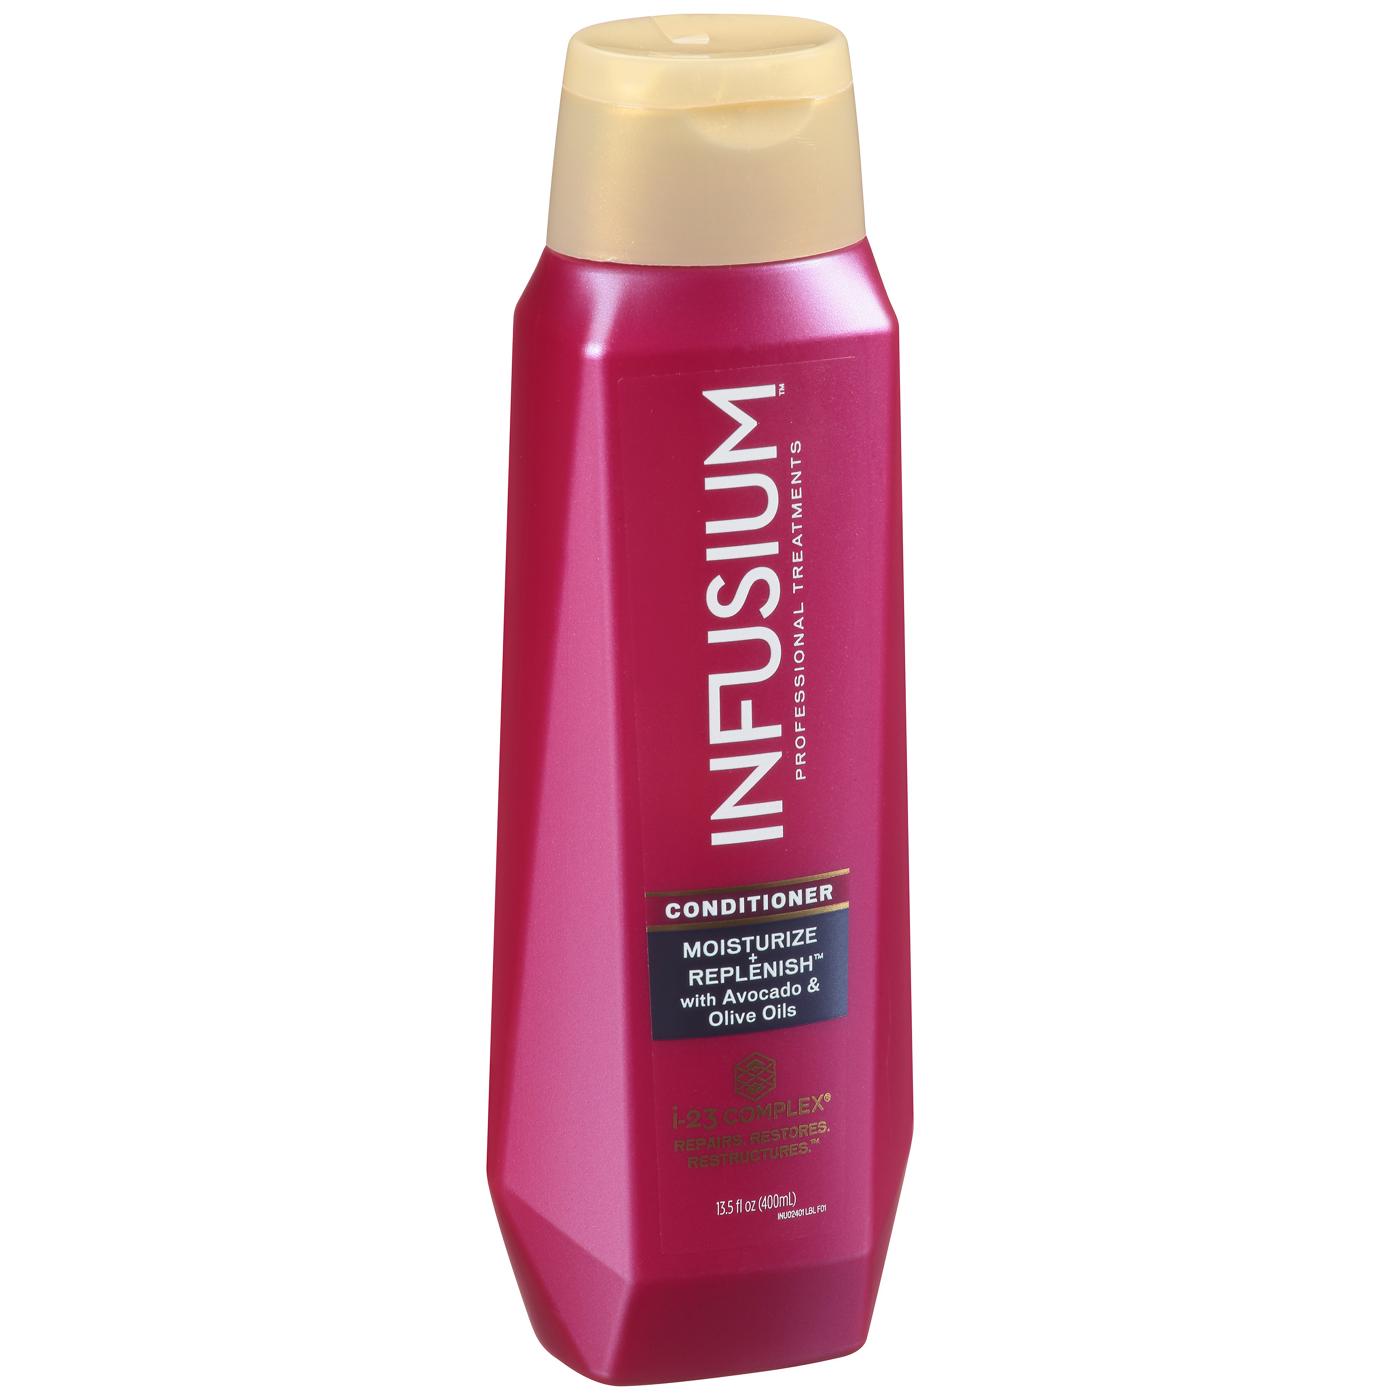 Infusium 23 Conditioner Moisturize And Replenish; image 2 of 2